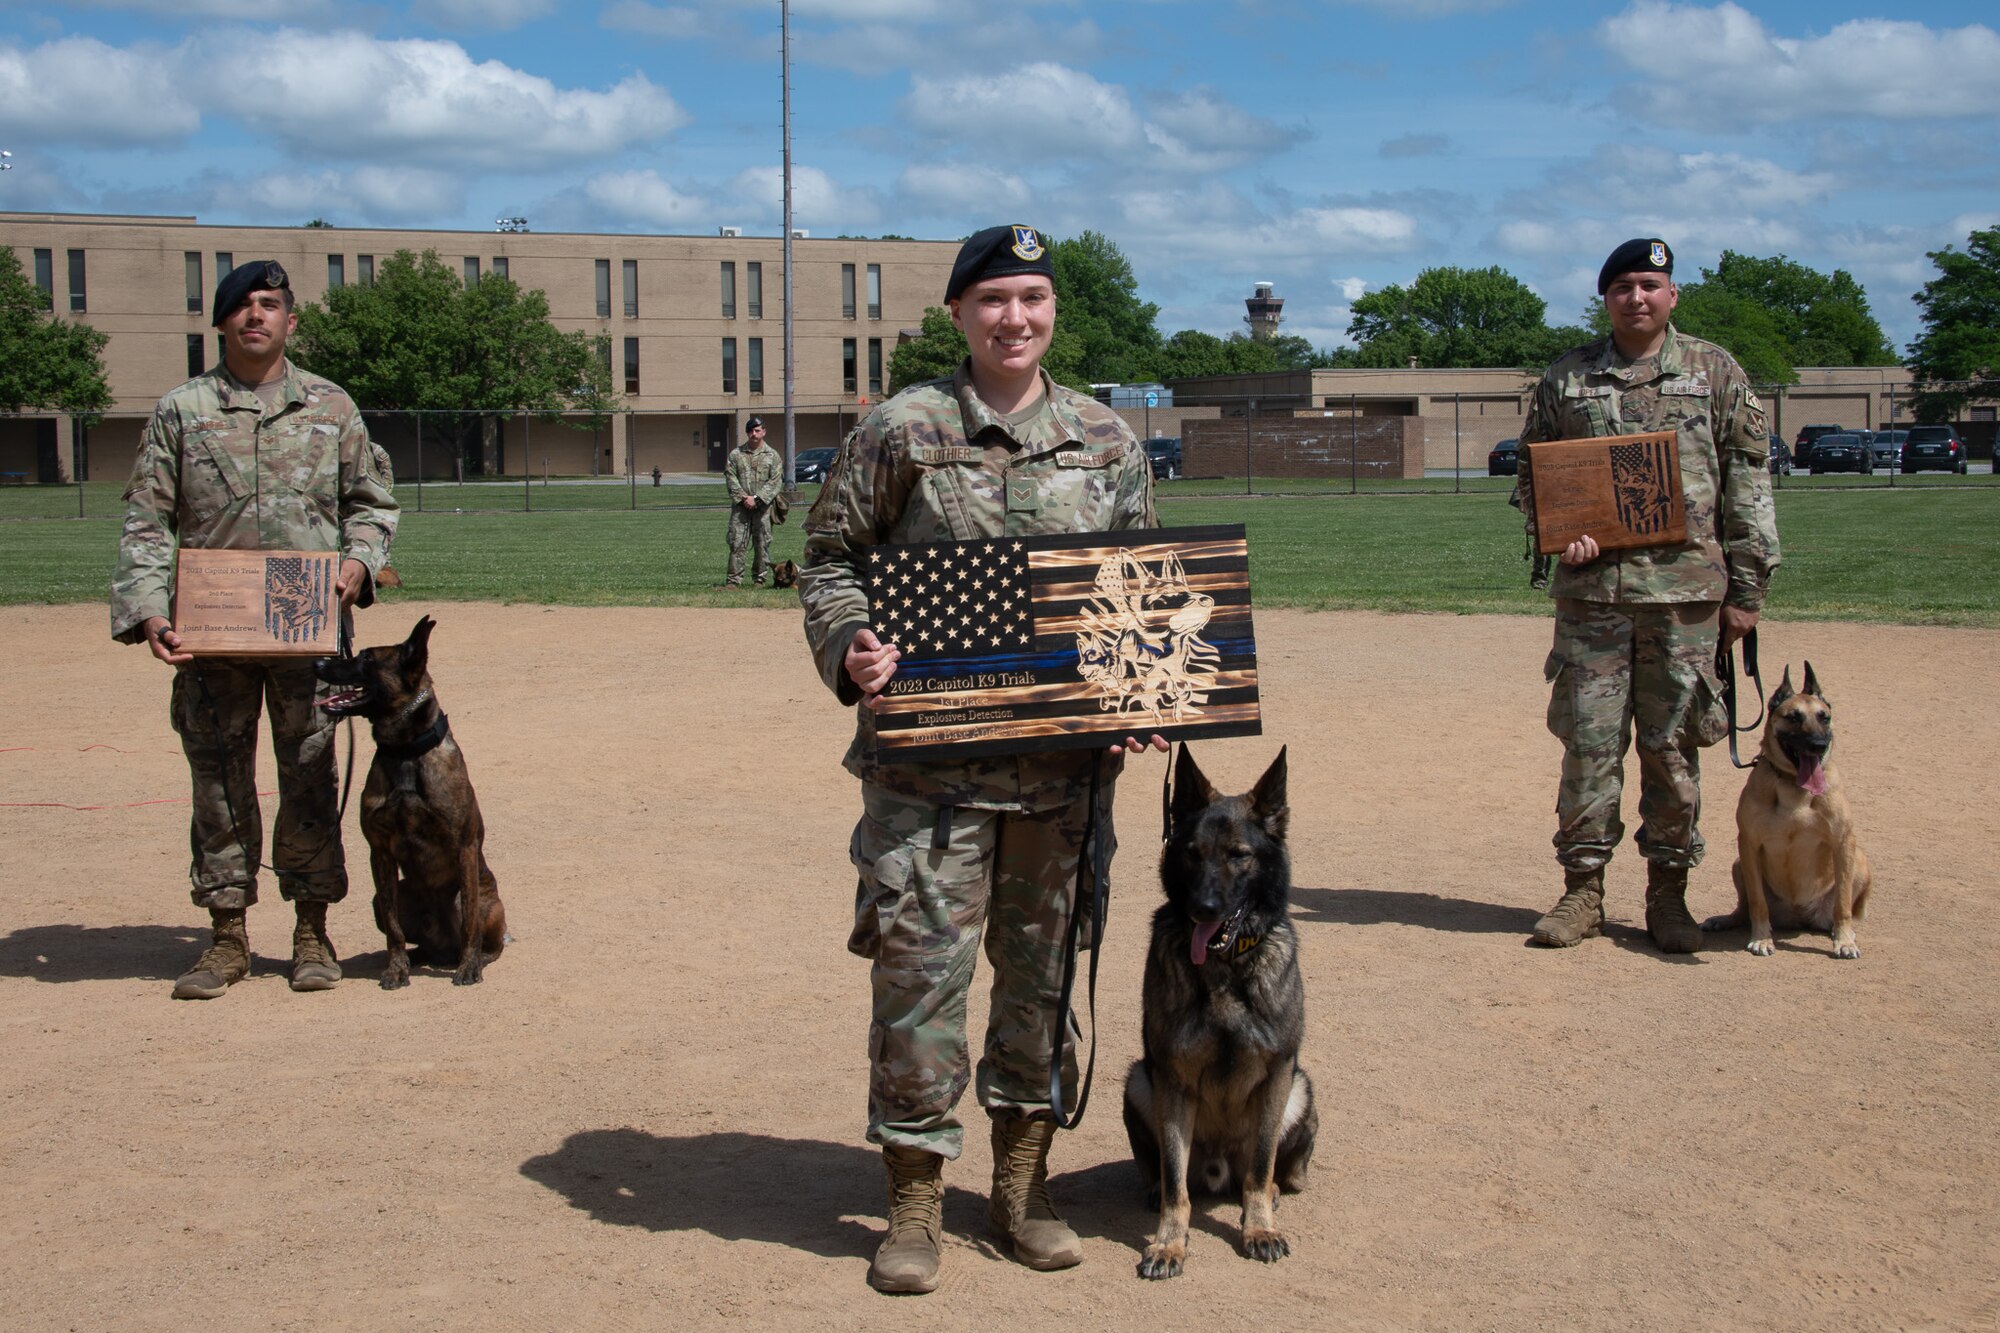 Men in uniform stand next to dogs.